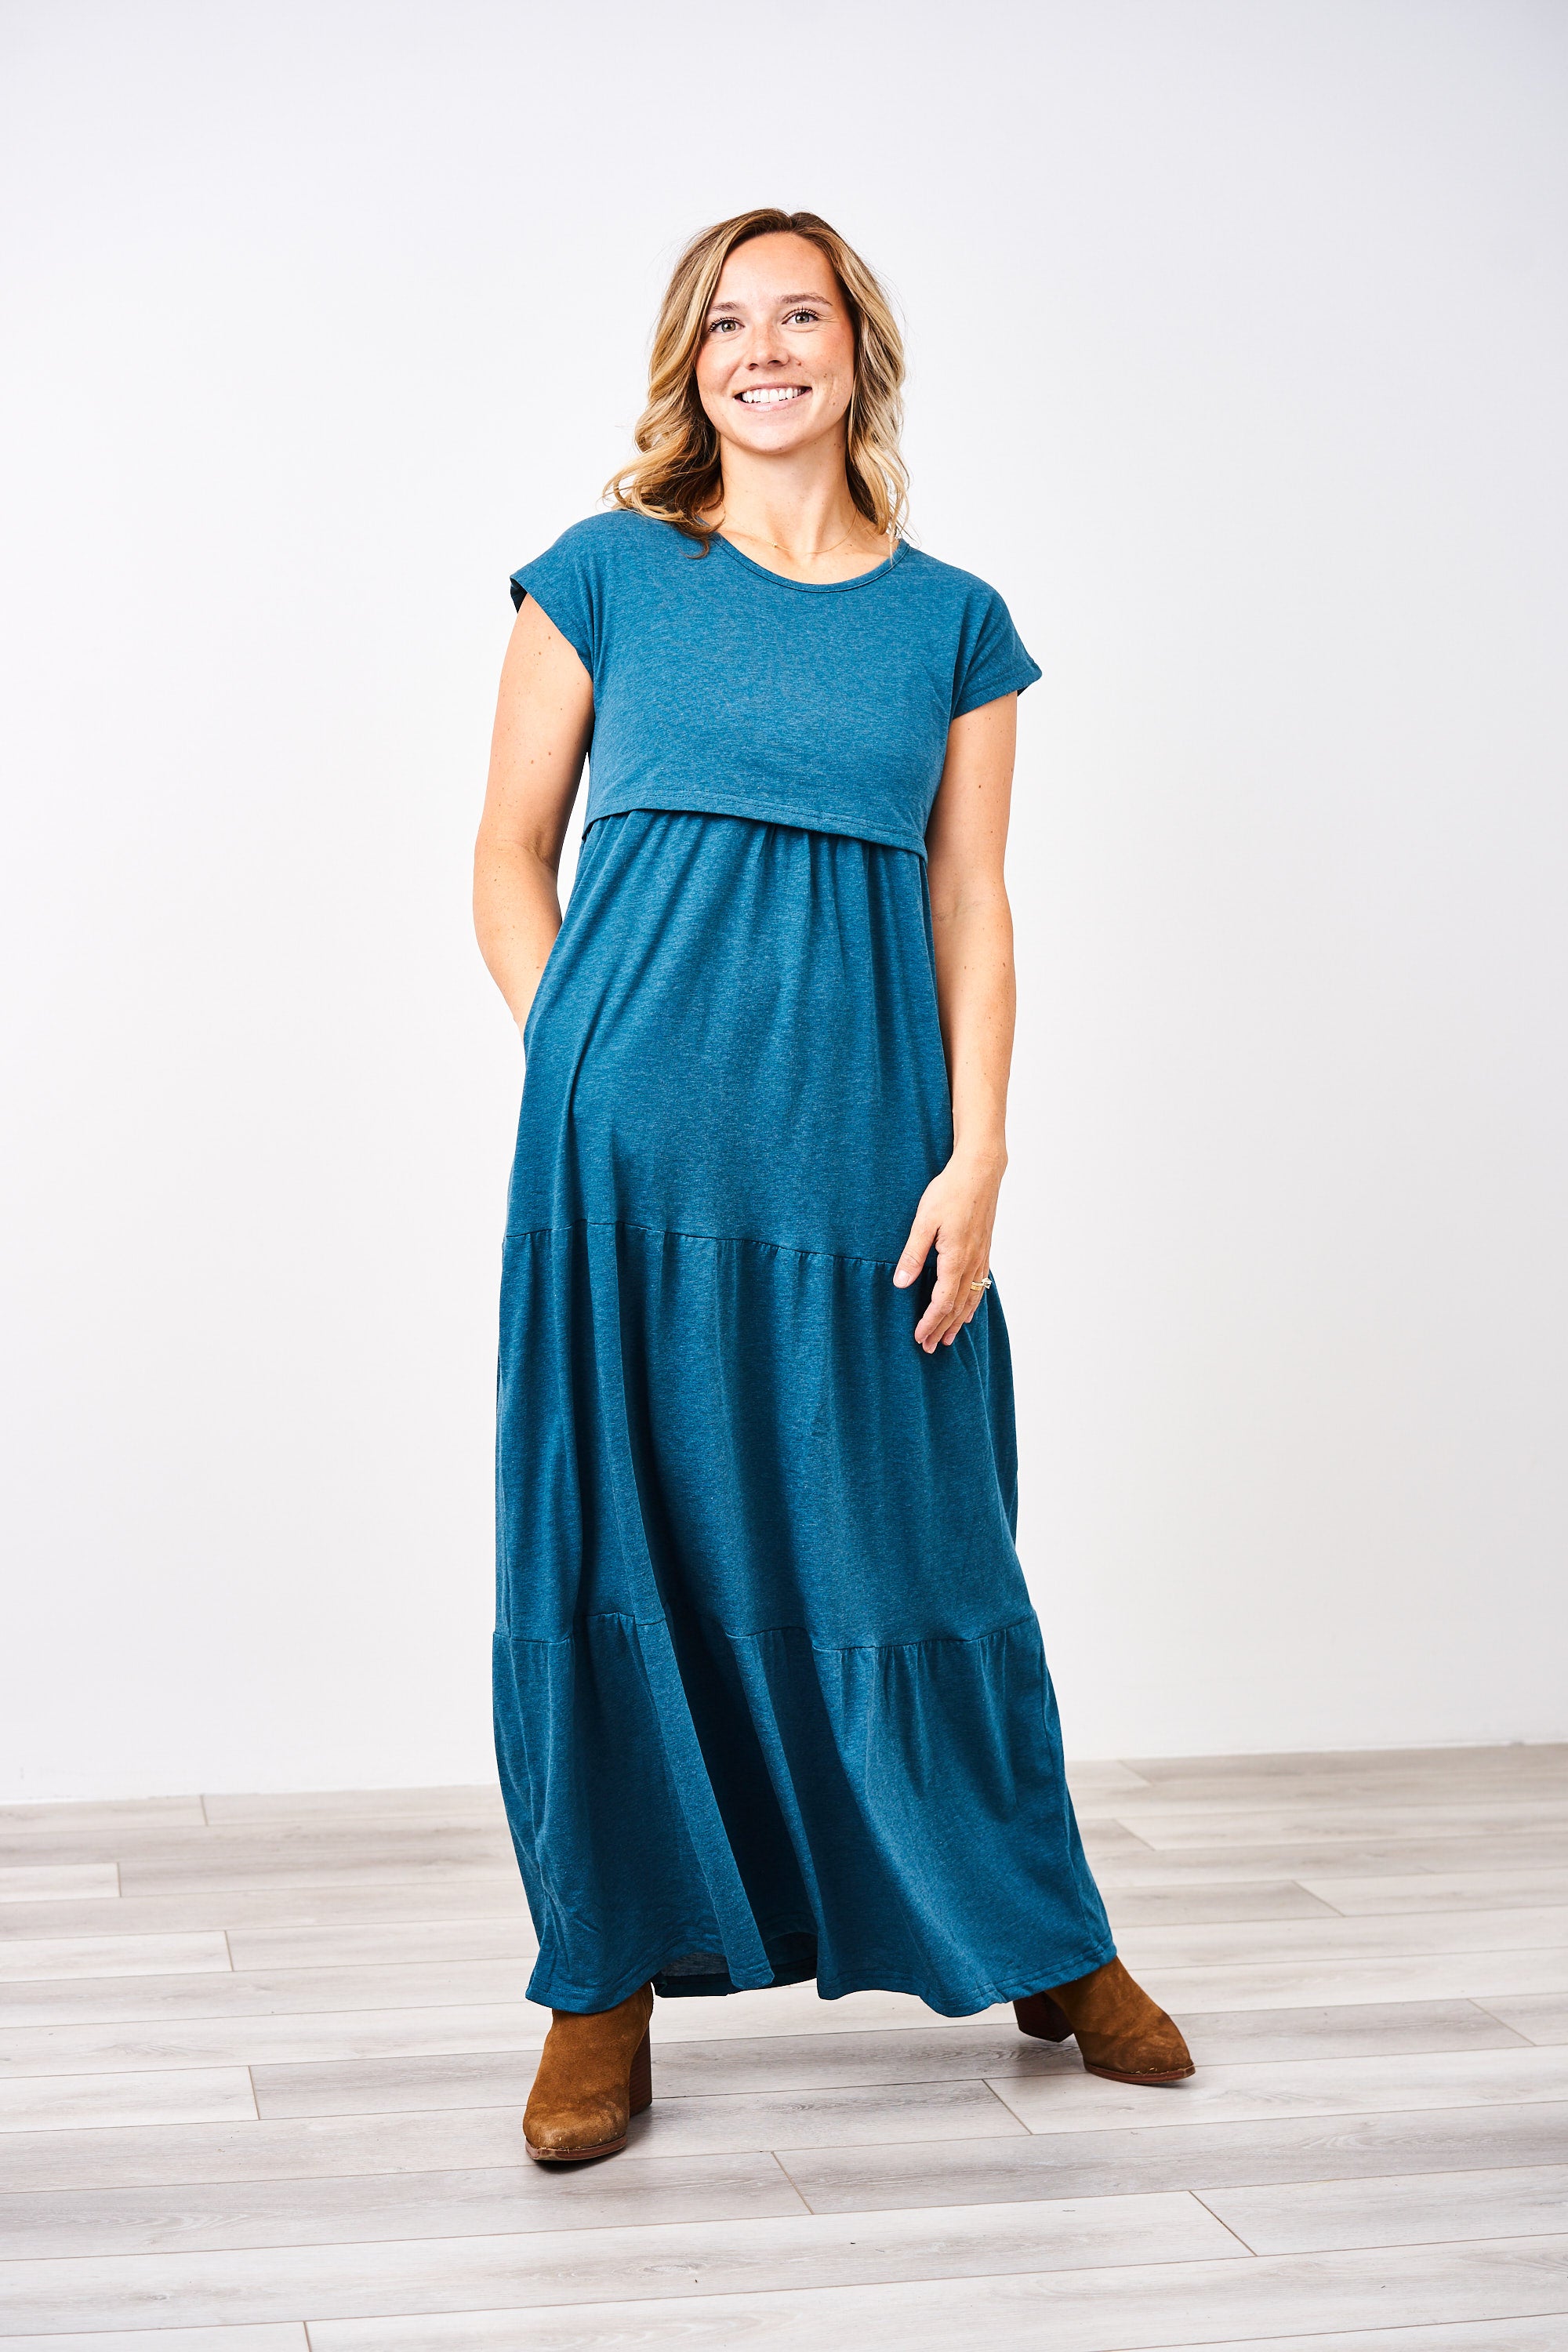 Maternity Wear - Buy Maternity Wear Online Starting at Just ₹271 | Meesho